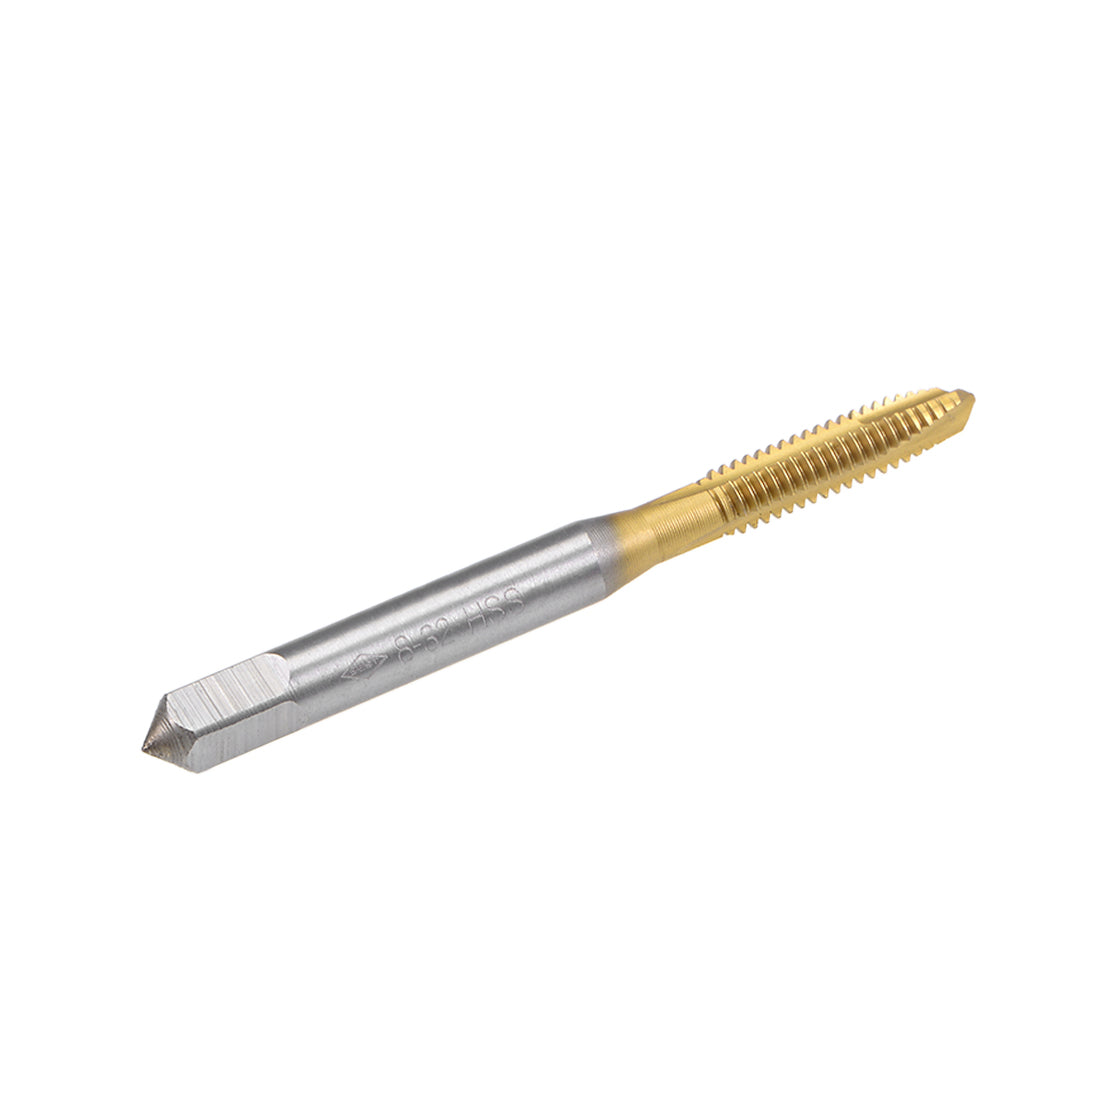 uxcell Uxcell Spiral Point Threading Tap 8-32 UNC Thread Pitch Titanium Coated HSS